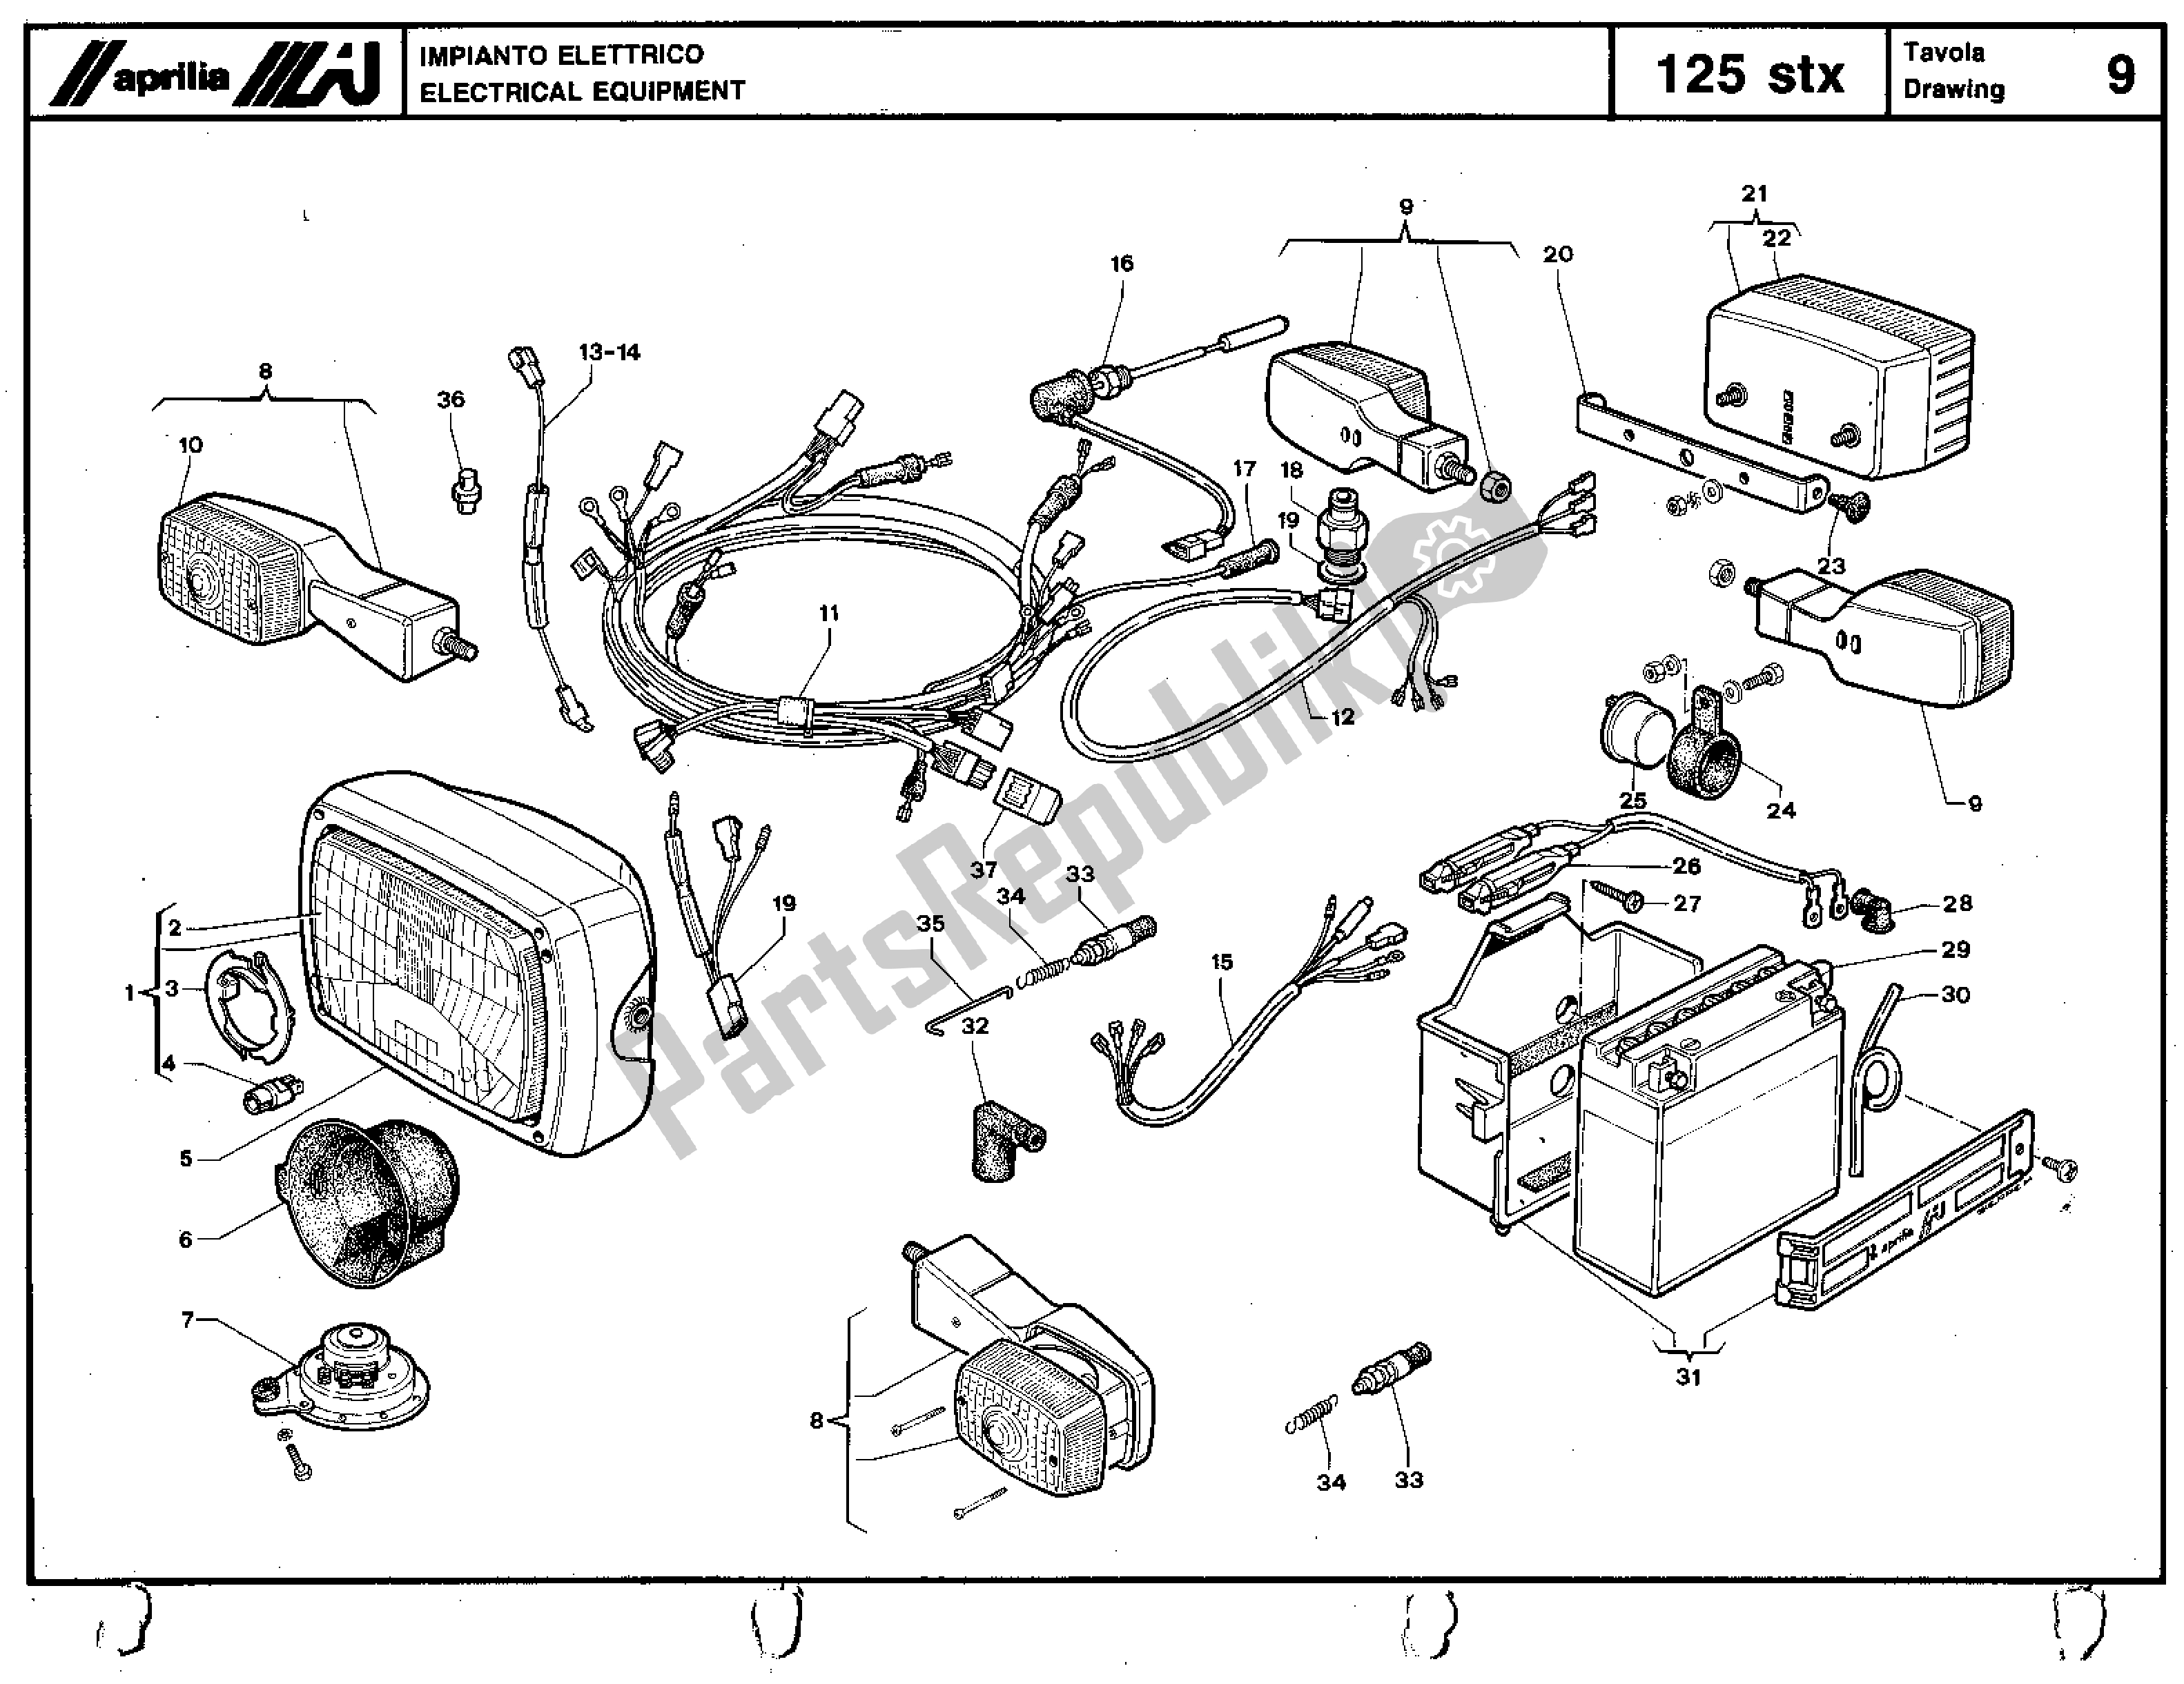 All parts for the Electrical Equipment of the Aprilia STX 125 1984 - 1986